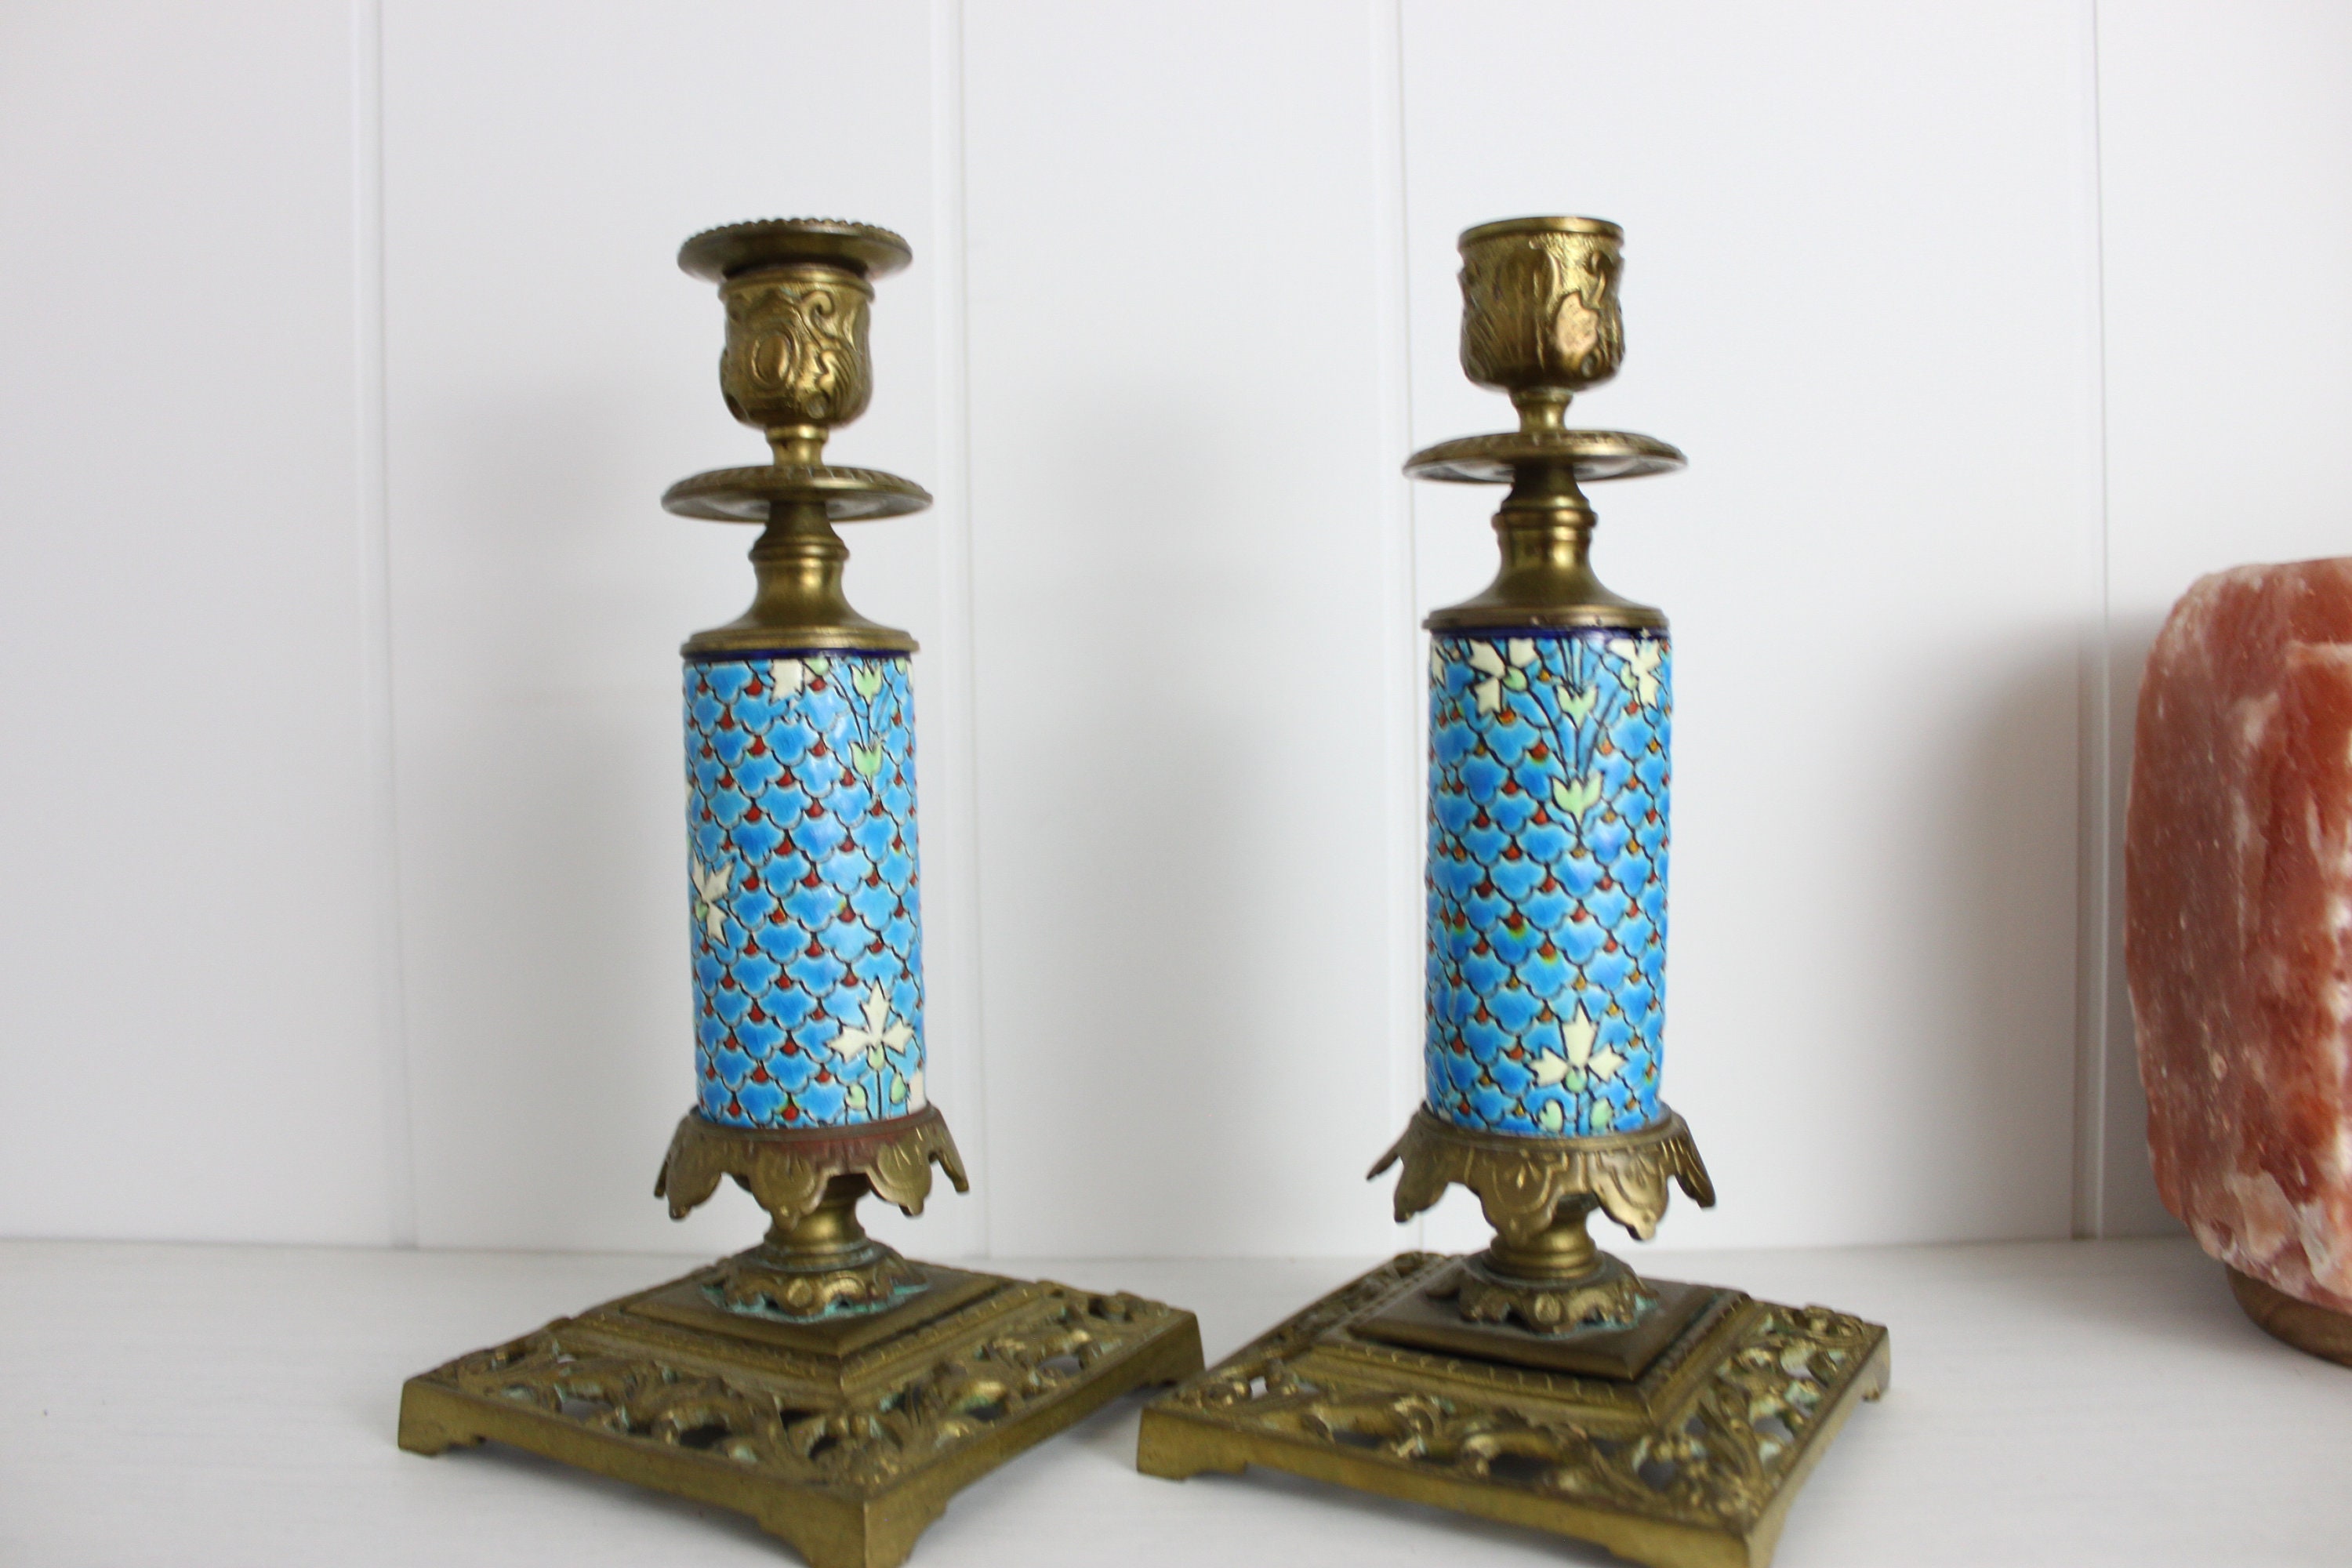 French Longwy Enamelled Pottery Chamberstick / Candle Holder with Lithophane